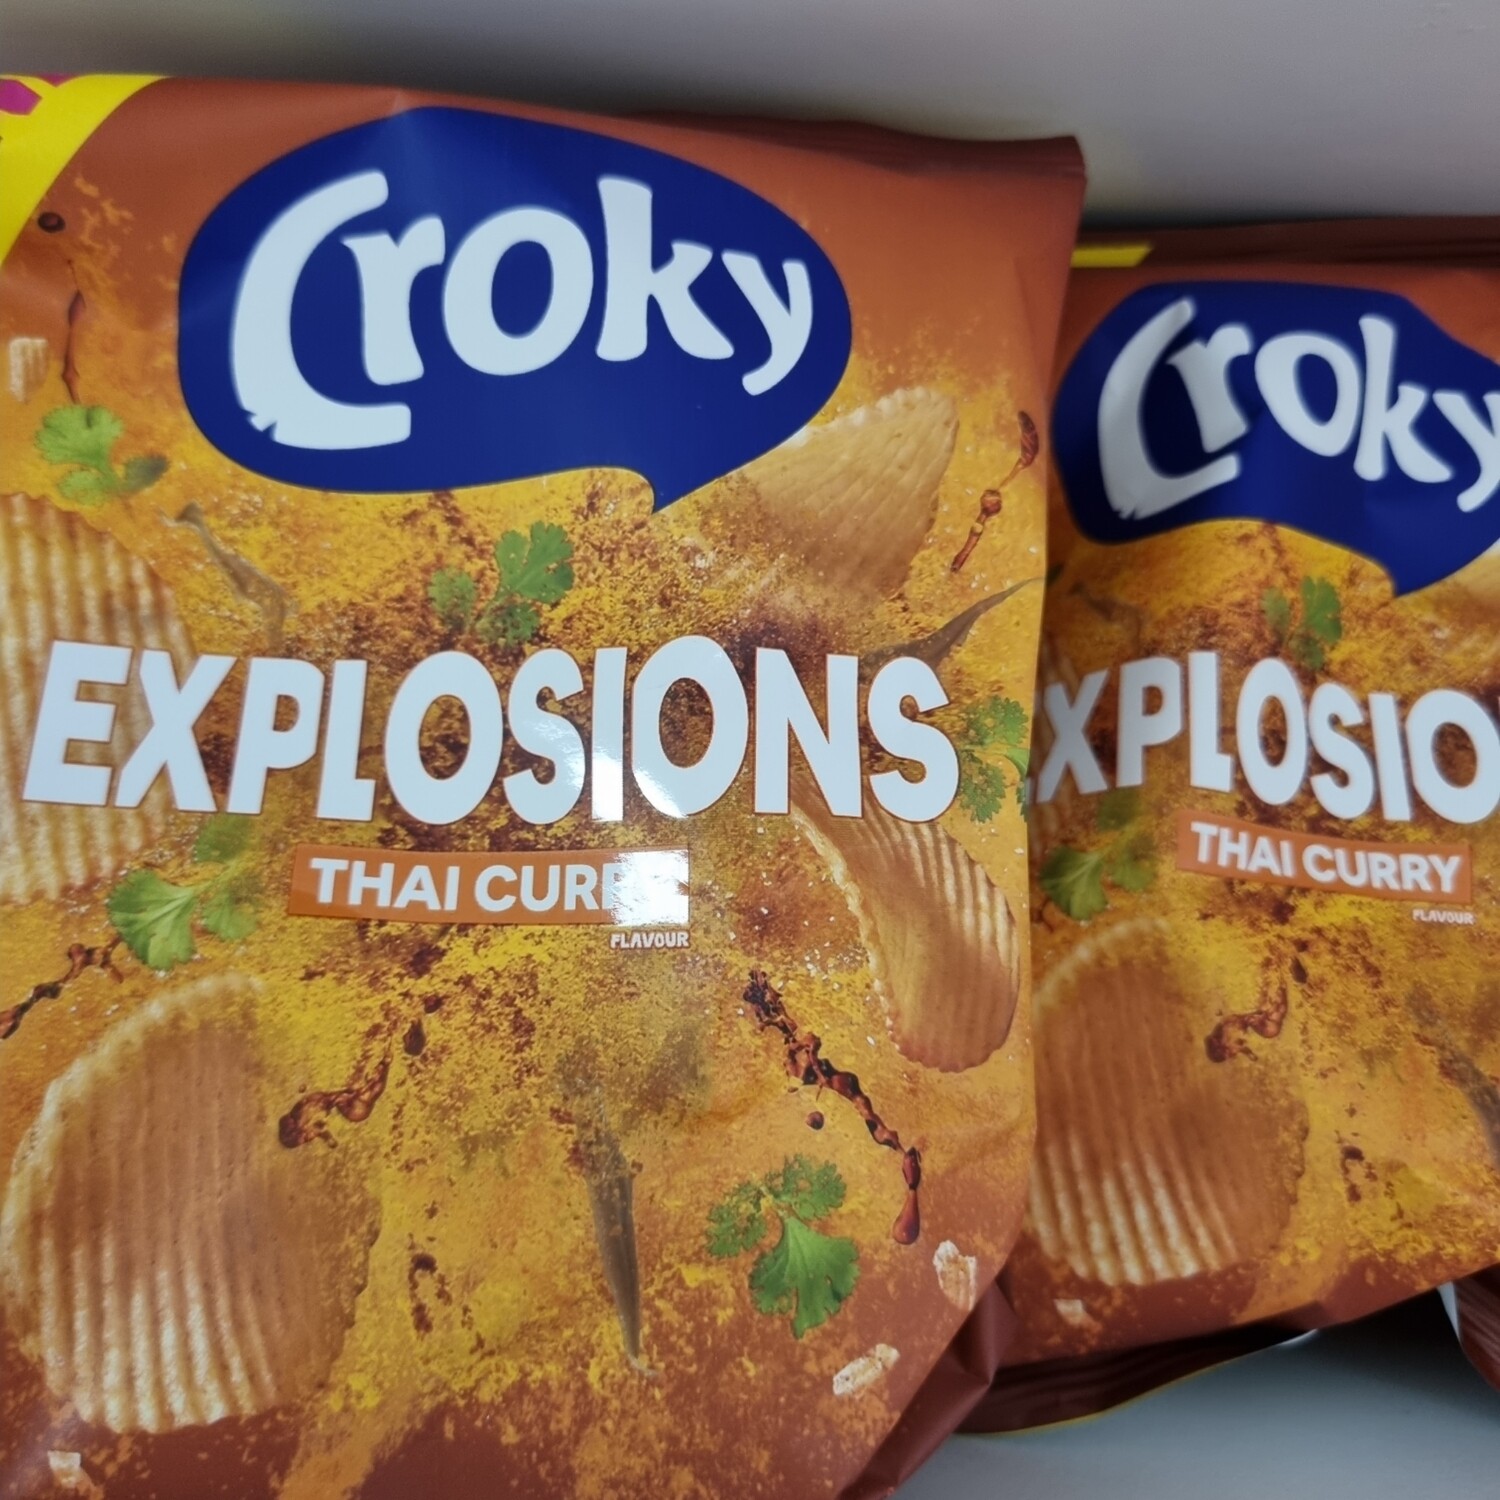 Croky chips explosions